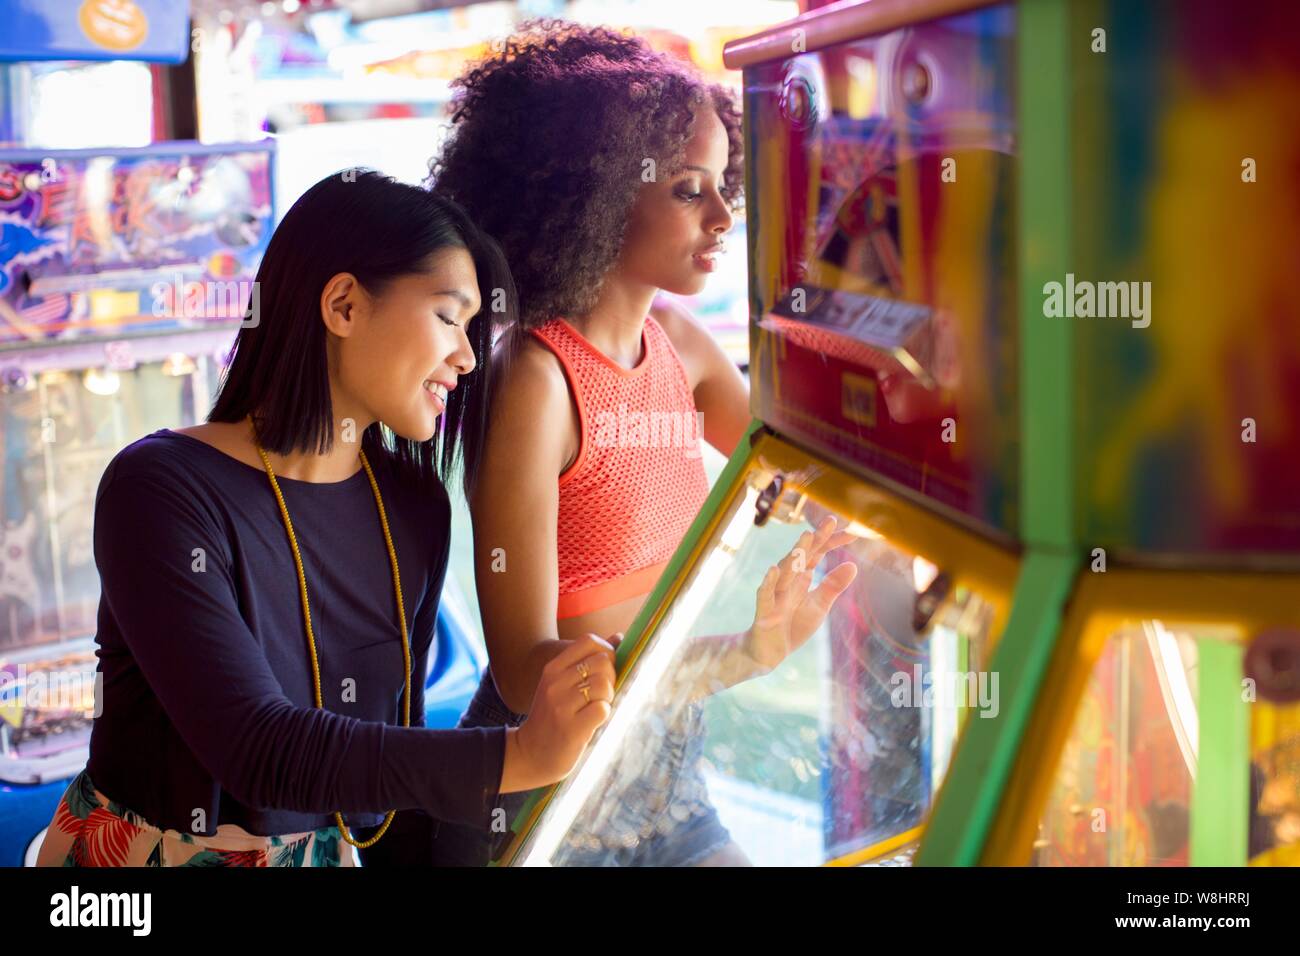 Two young women playing arcade game at fun fair. Stock Photo